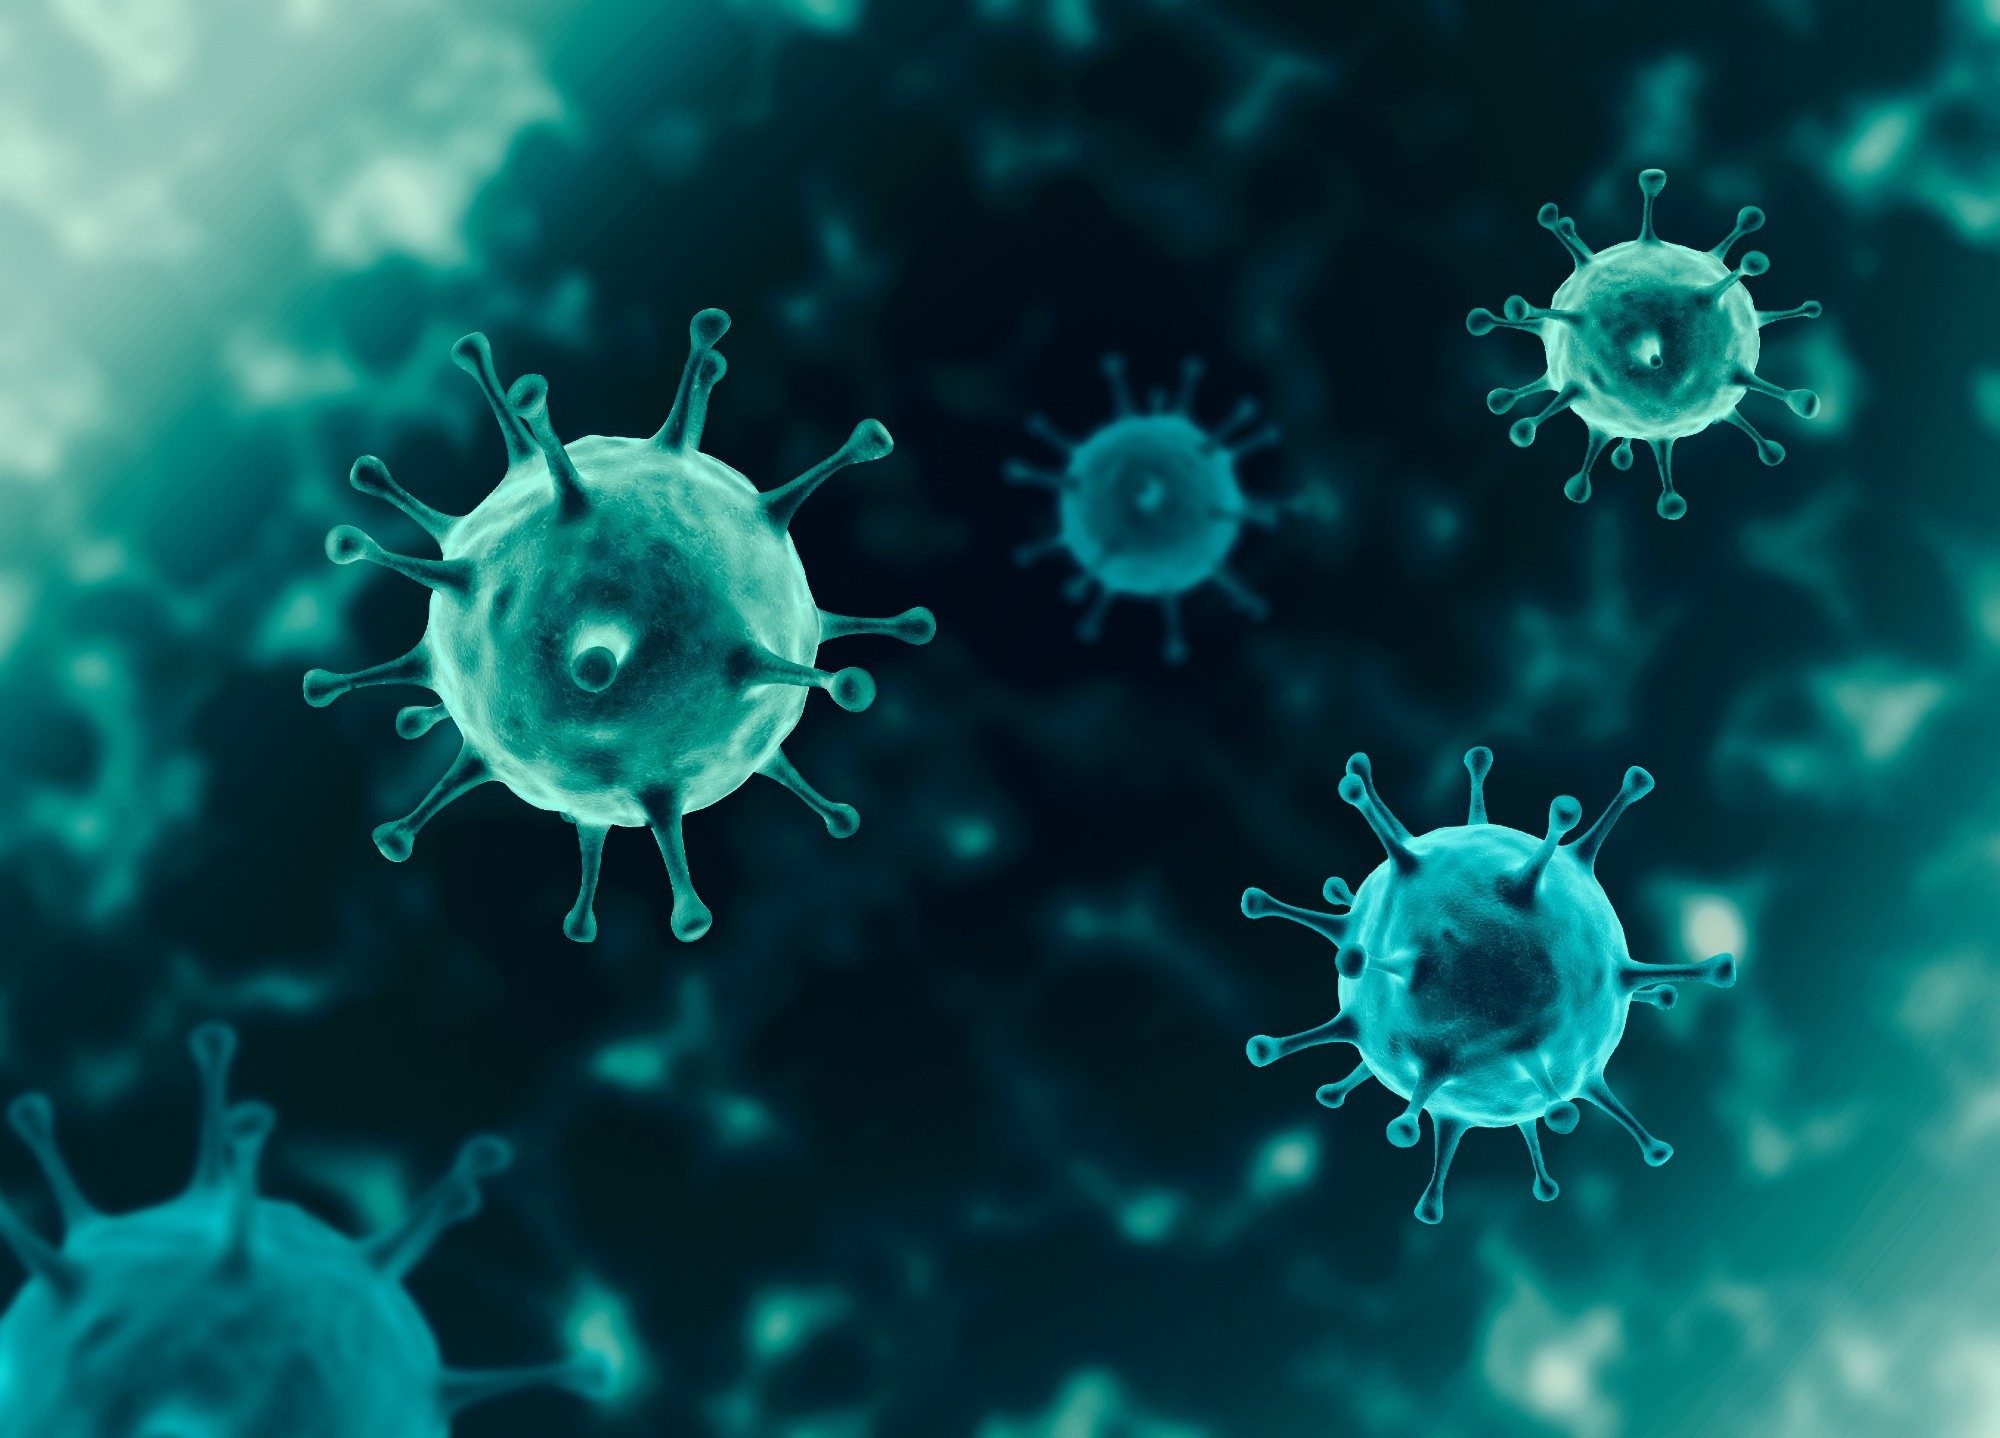 Study: Risk factors for severe Covid-19 breakthrough infections: an observational longitudinal study. Image Credit: Nhemz/Shutterstock